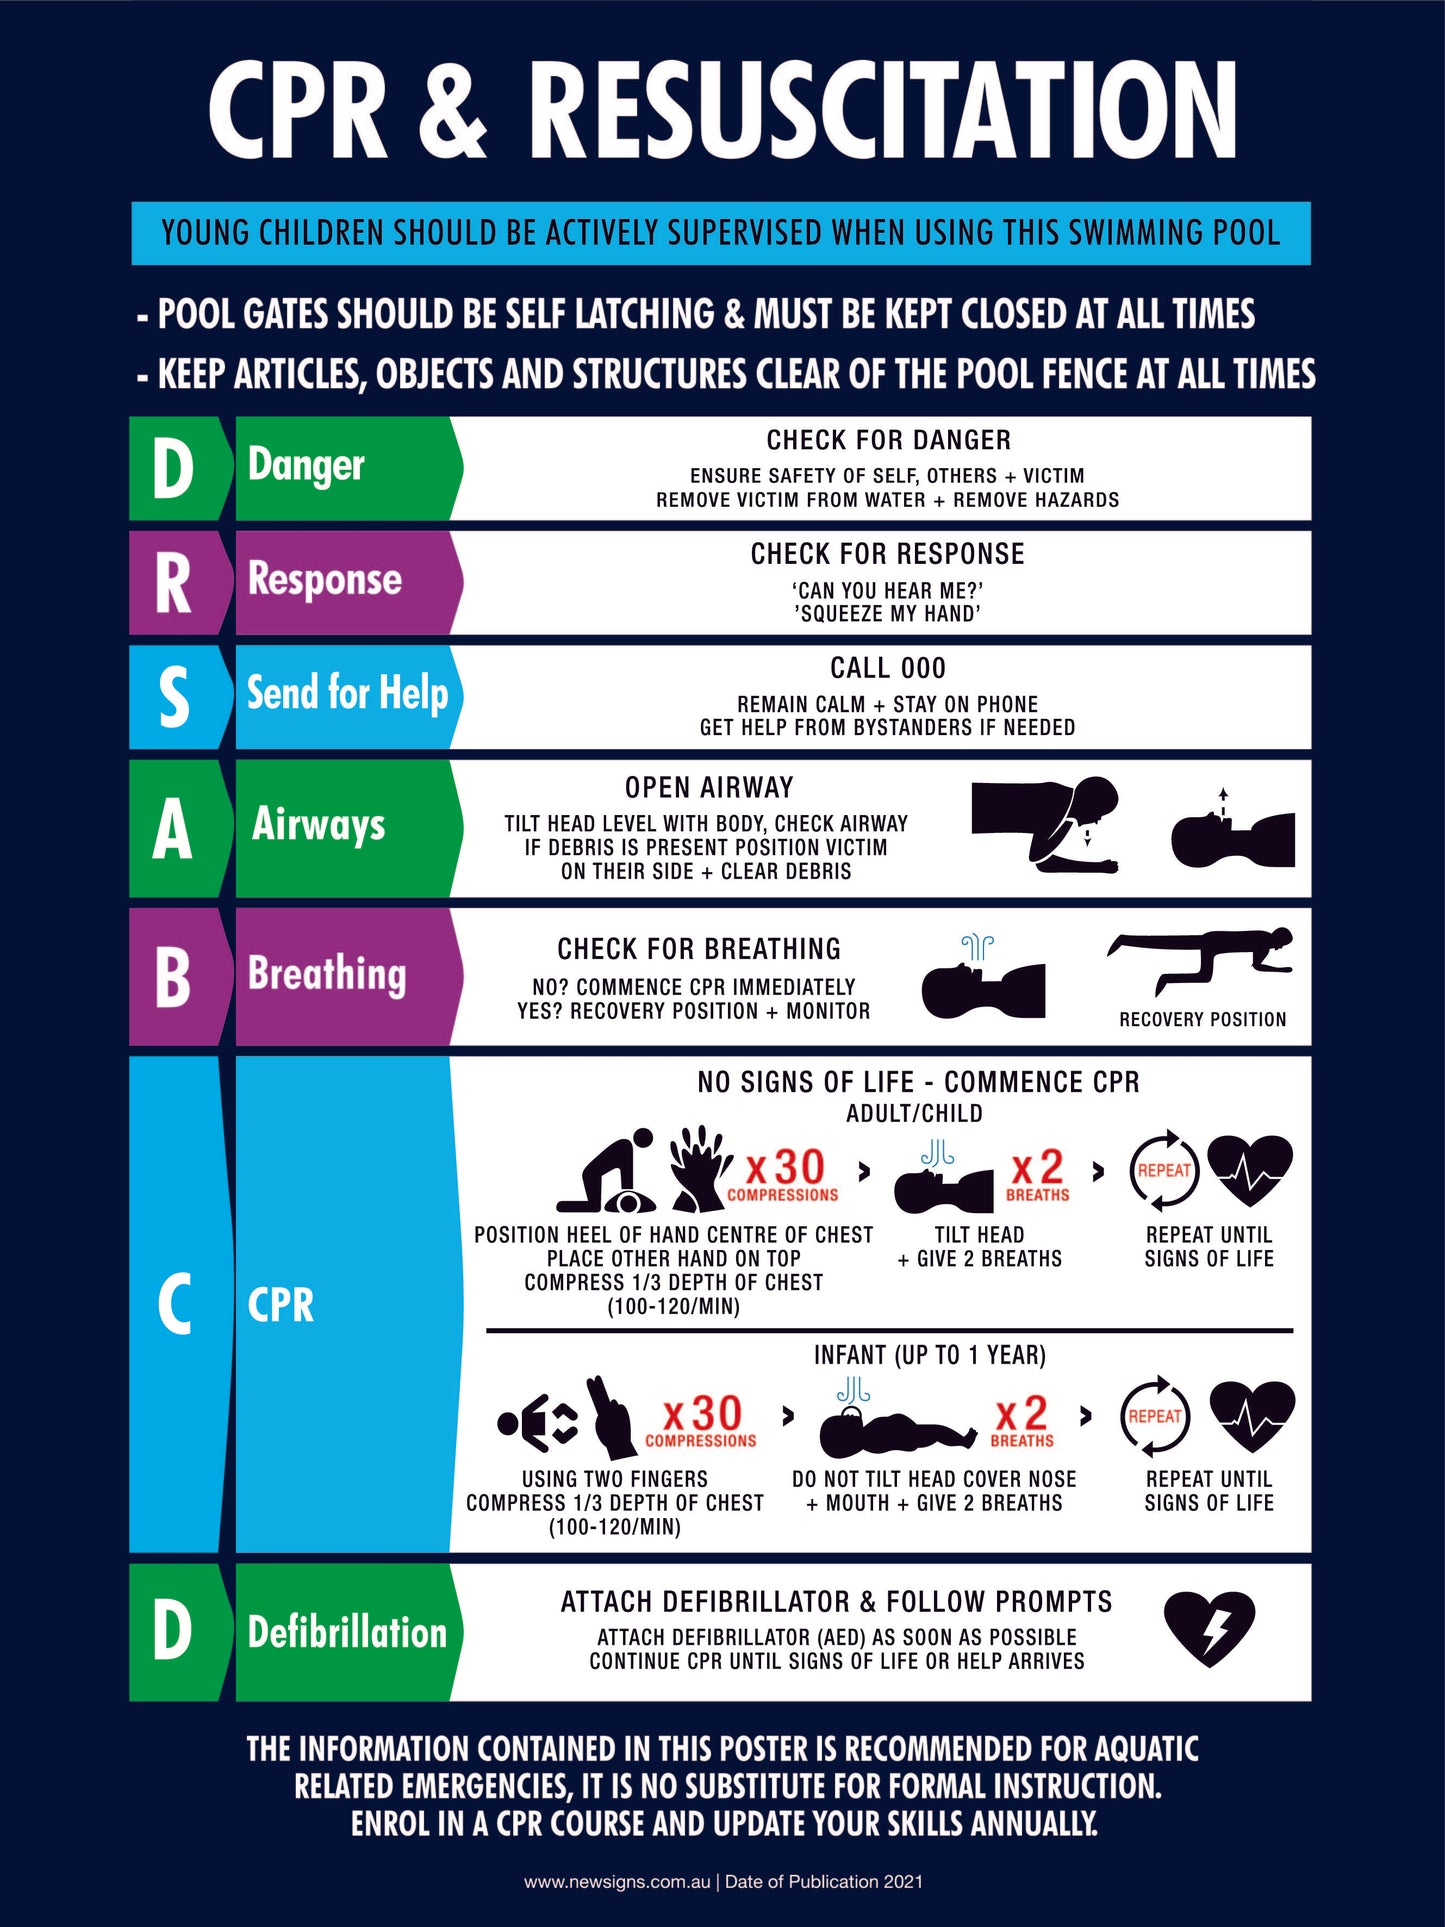 CPR Resuscitation Guide 3 Sign